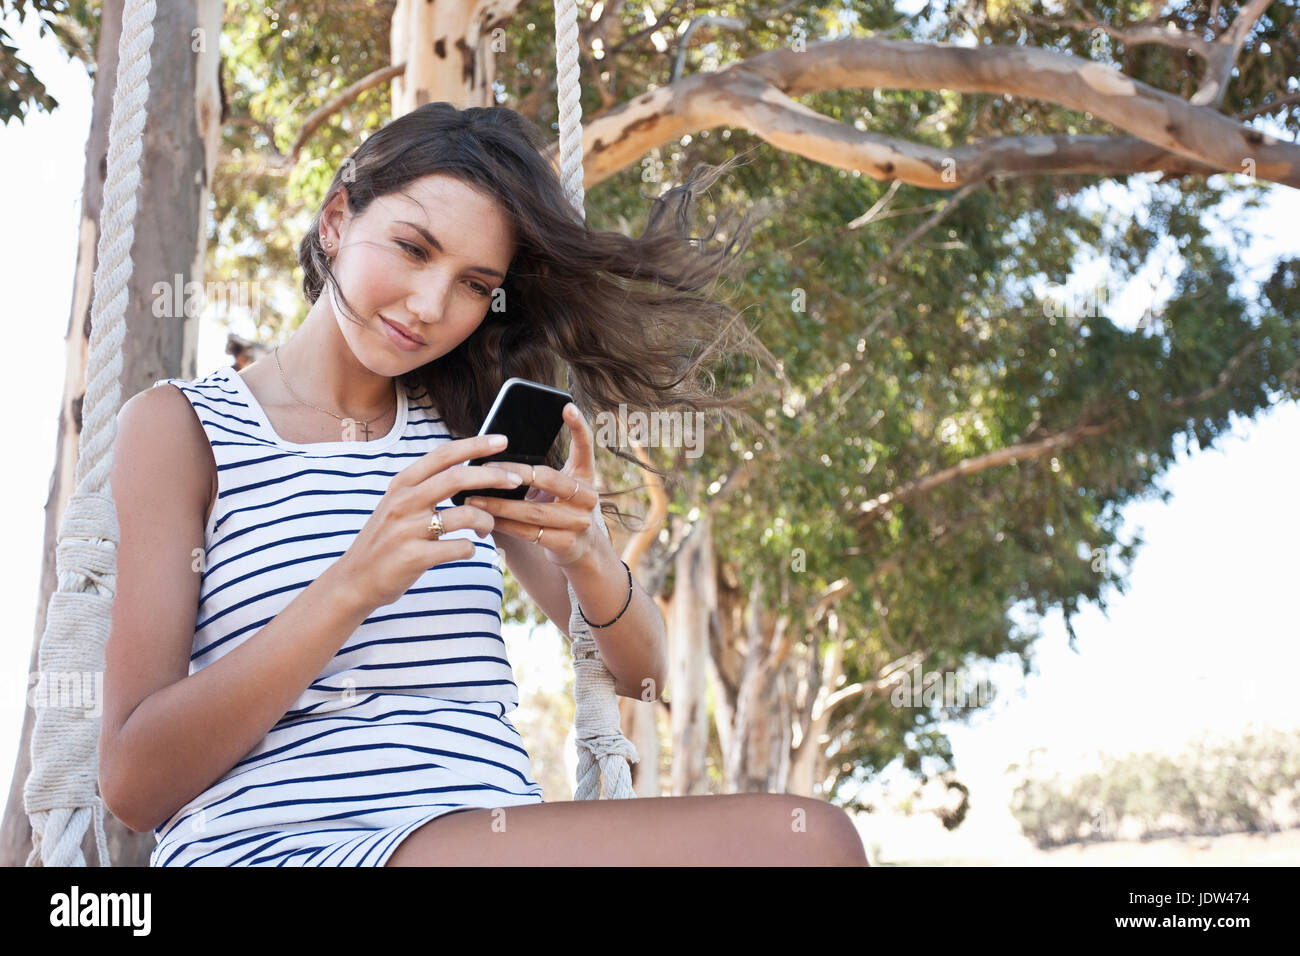 Young adult woman sitting on swing using smartphone Stock Photo